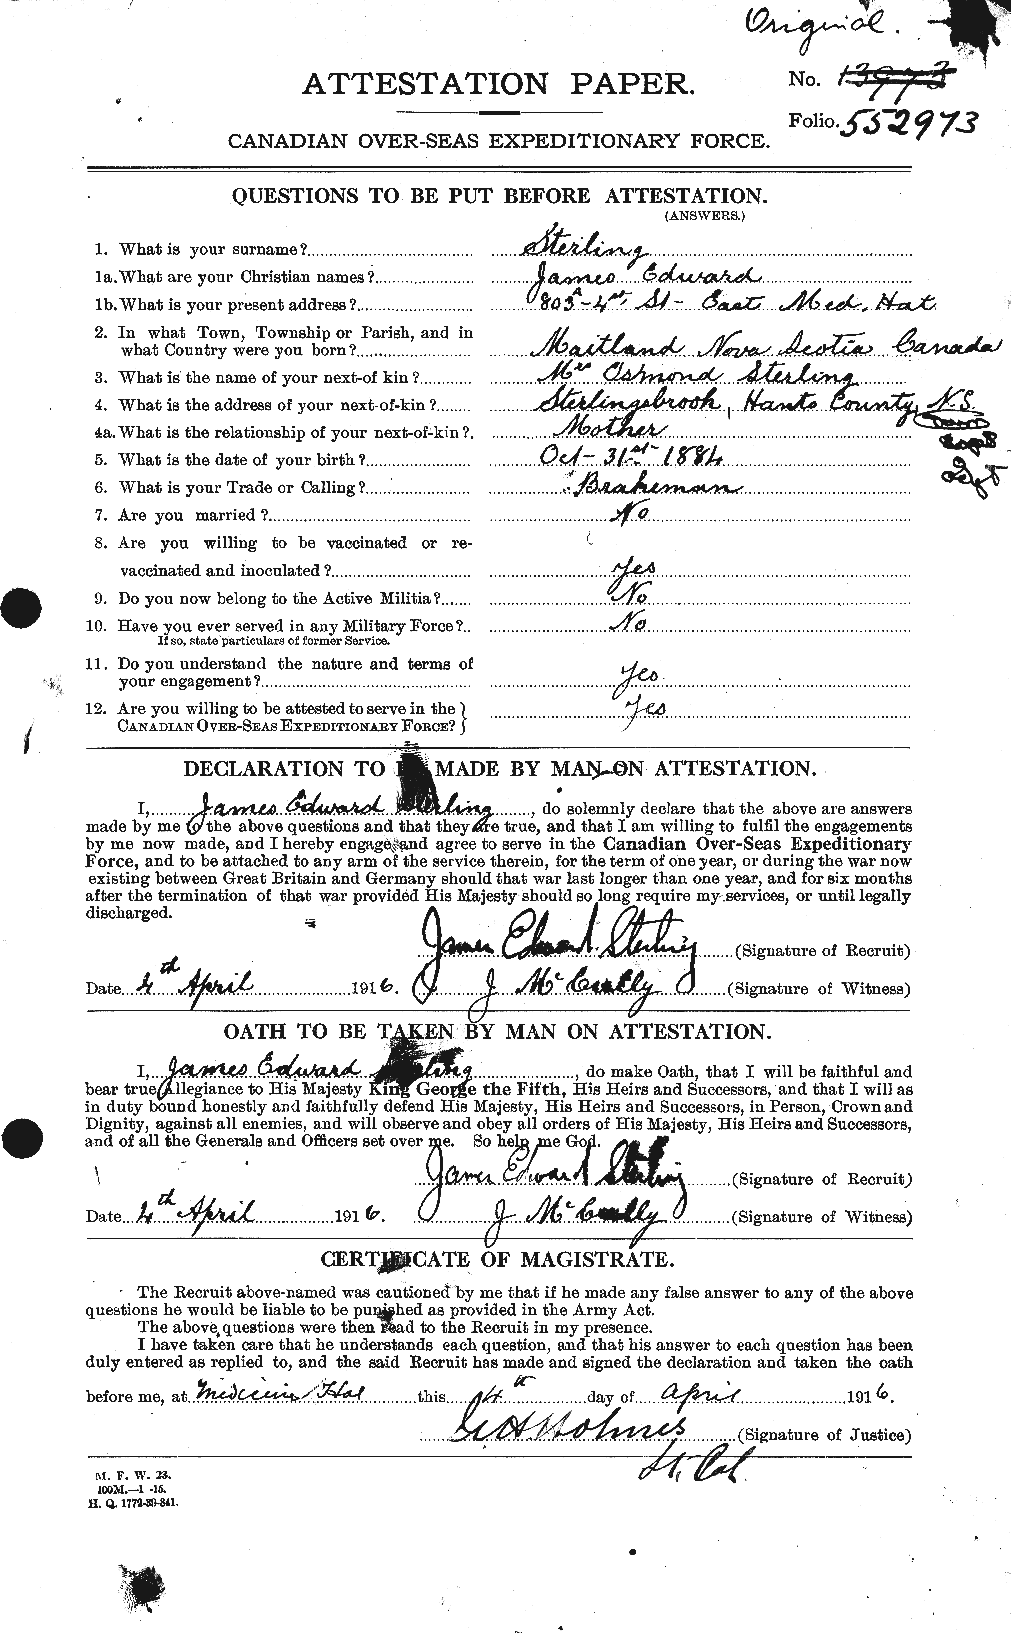 Personnel Records of the First World War - CEF 115167a